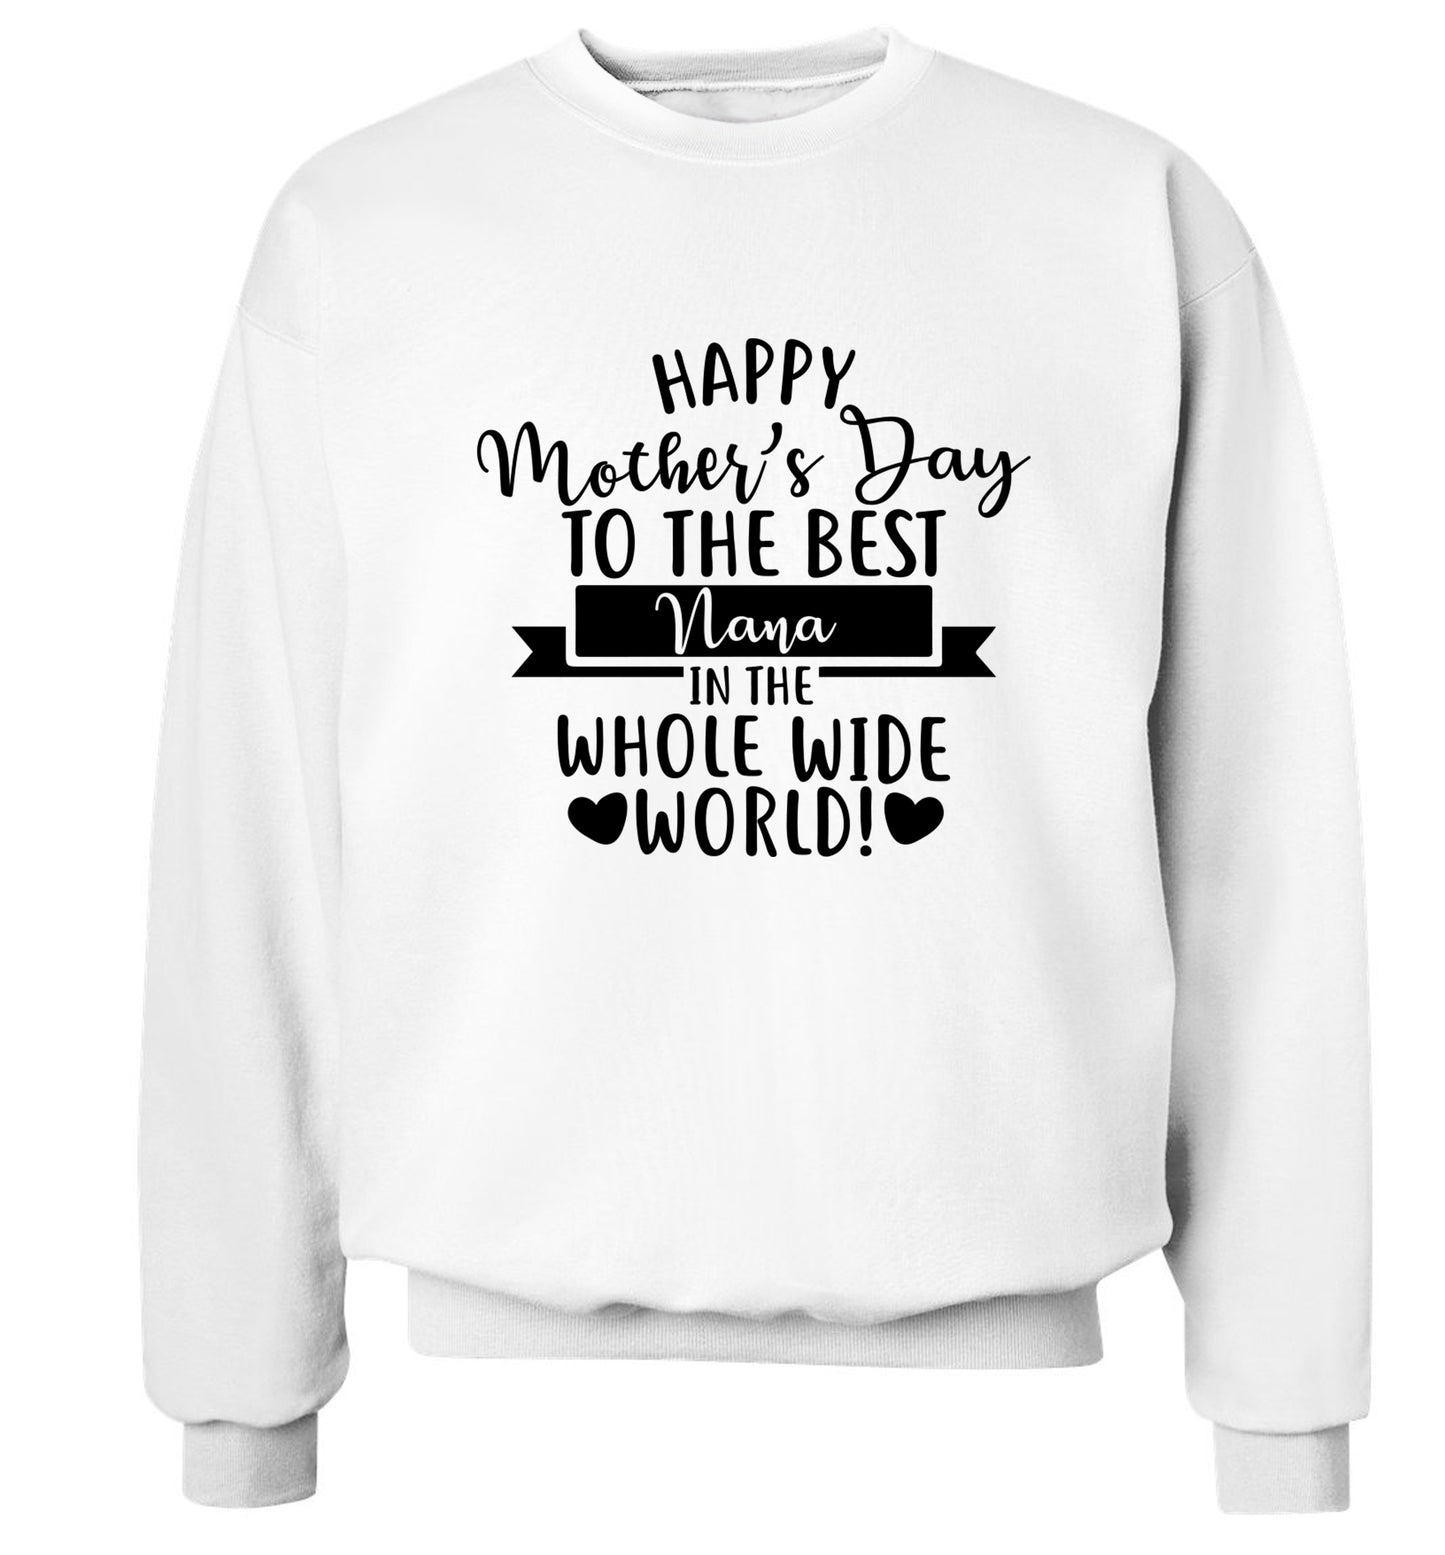 Happy mother's day to the best Nana in the world Adult's unisex white Sweater 2XL